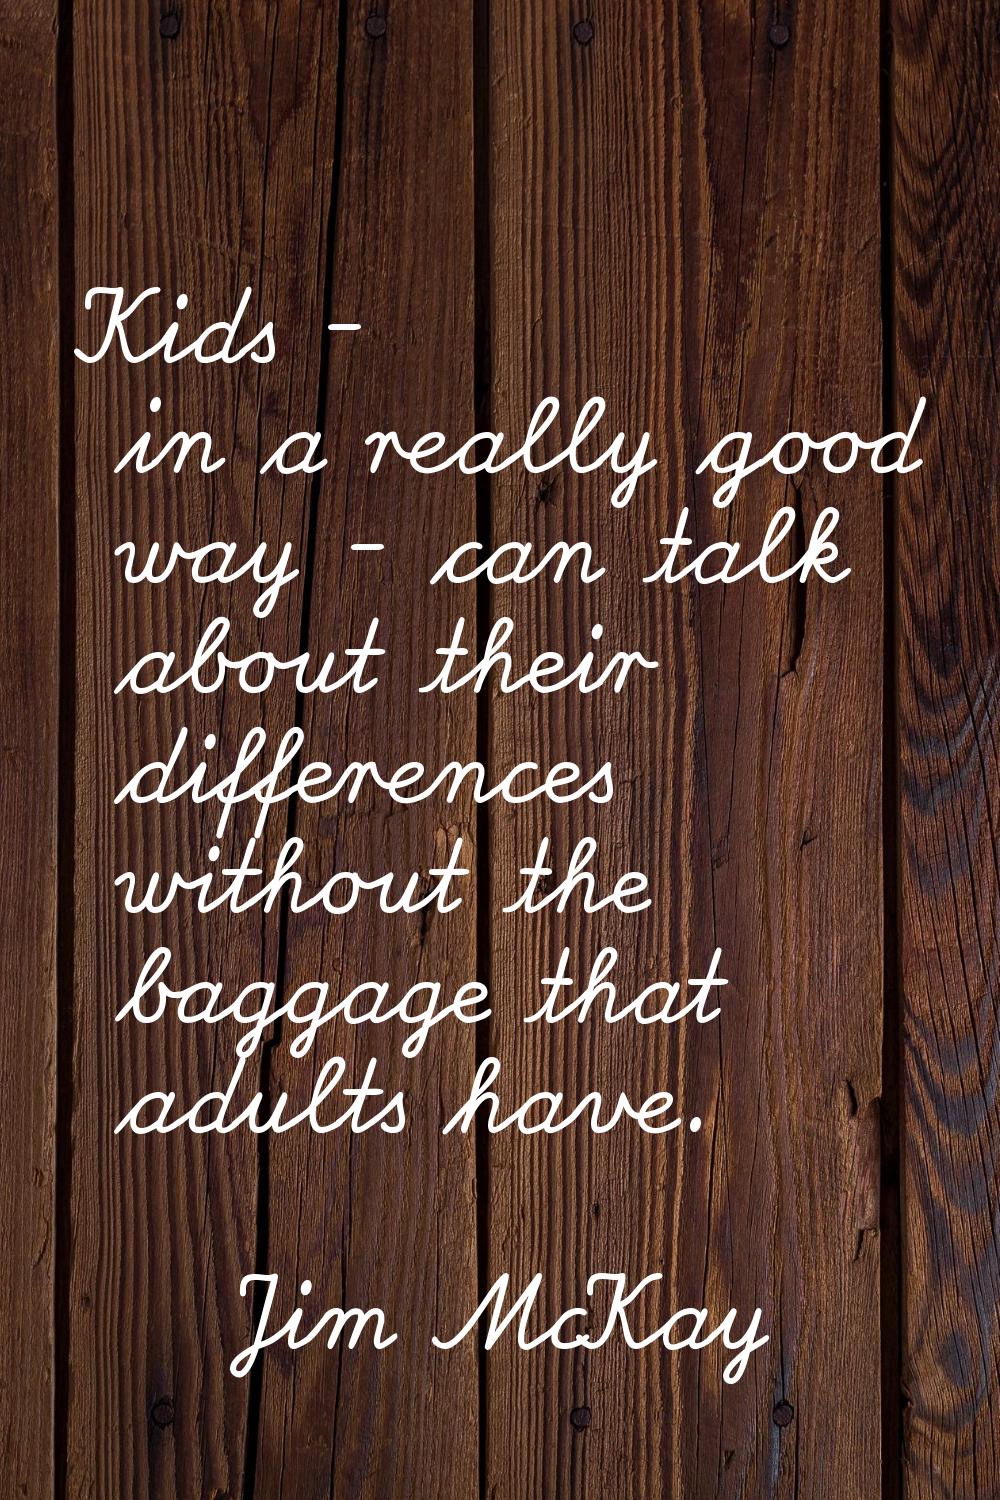 Kids - in a really good way - can talk about their differences without the baggage that adults have